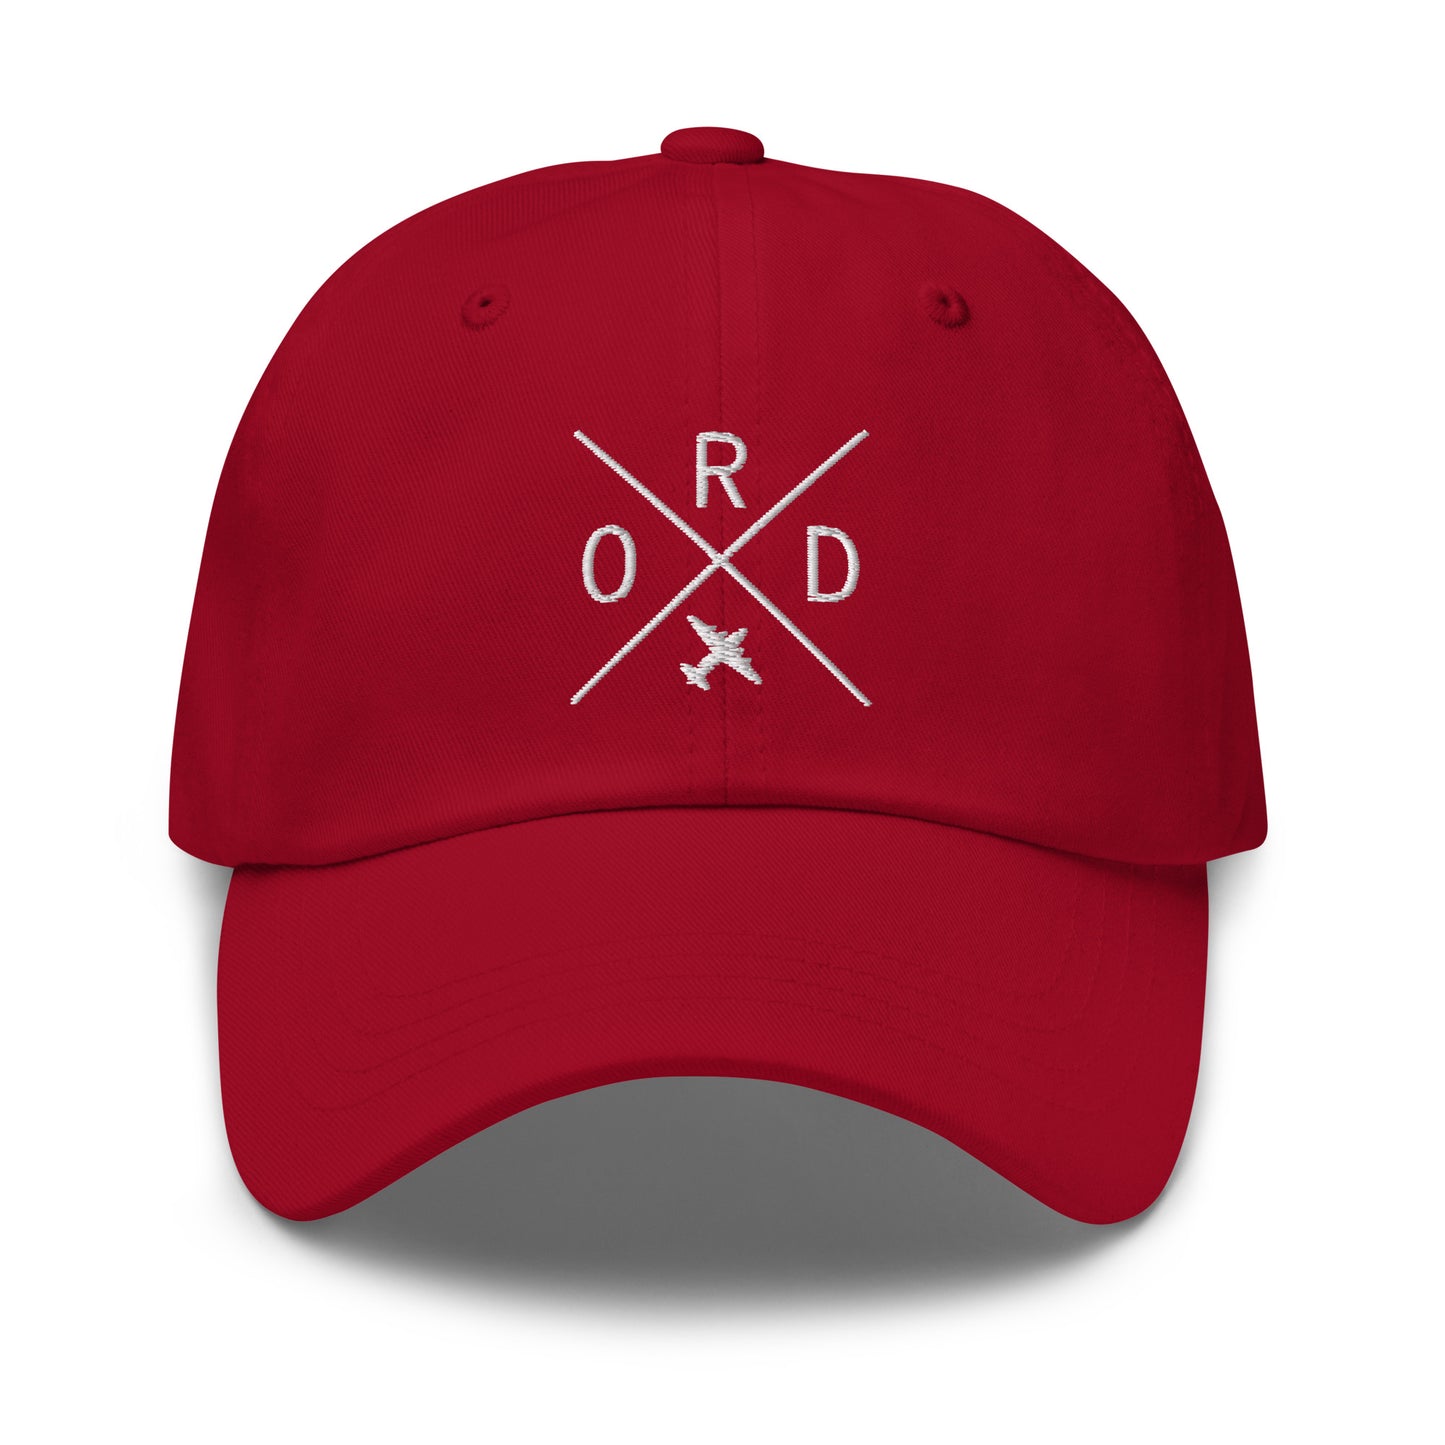 Crossed-X Dad Hat - White • ORD Chicago • YHM Designs - Image 19